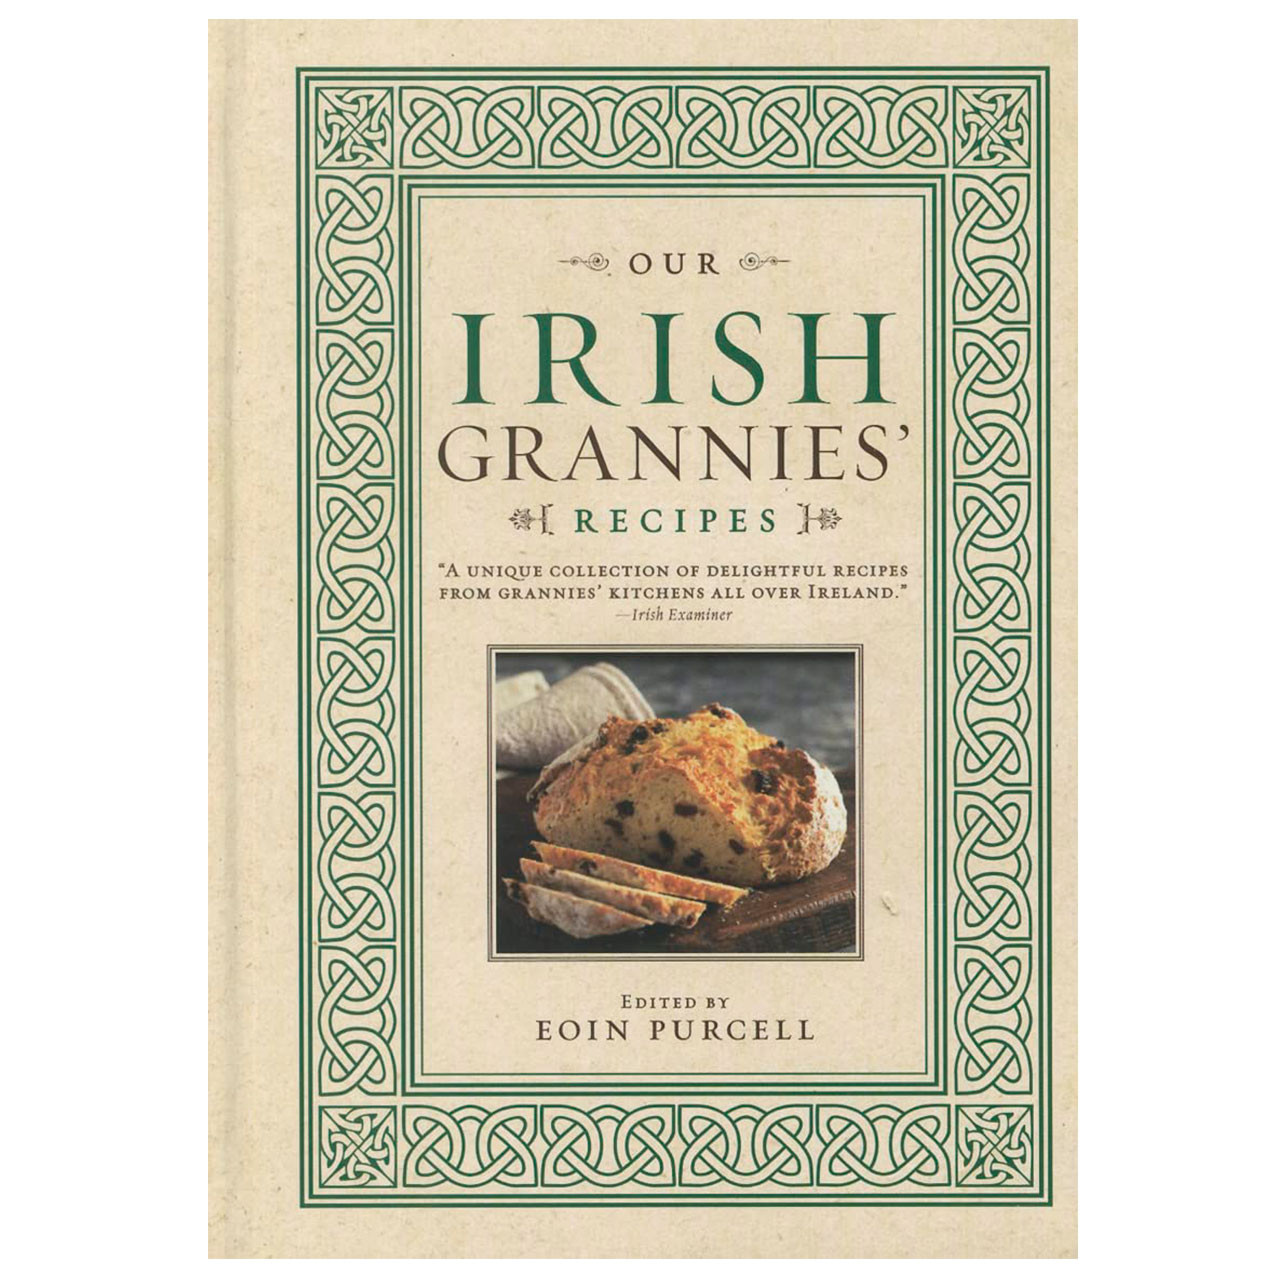 Our Irish Grannies' Recipe book by Eoin Purcell